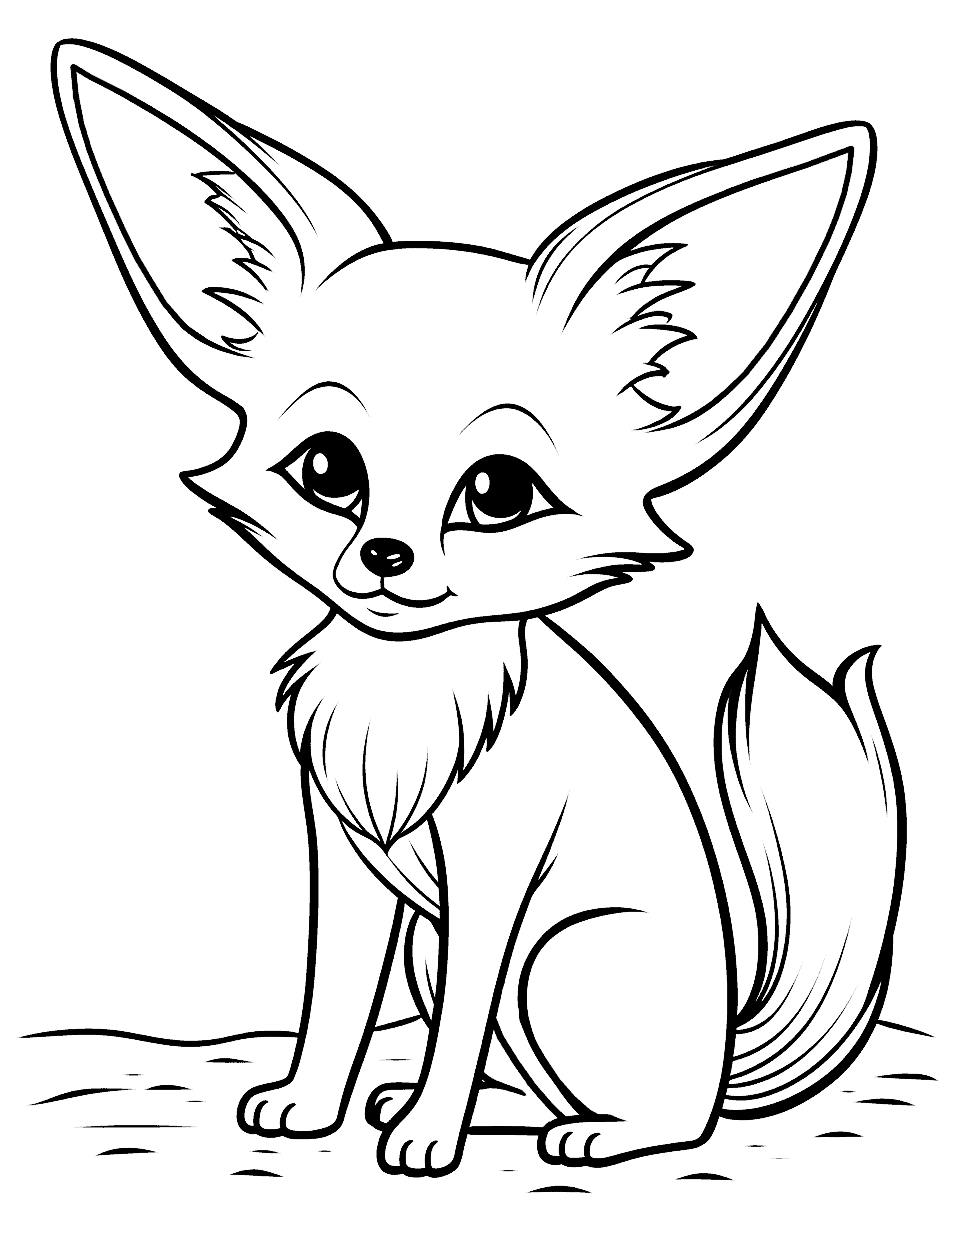 Dainty Fennec Fox Coloring Page - The desert’s gem, a Fennec fox, with its iconic large ears, basking in the warm glow.